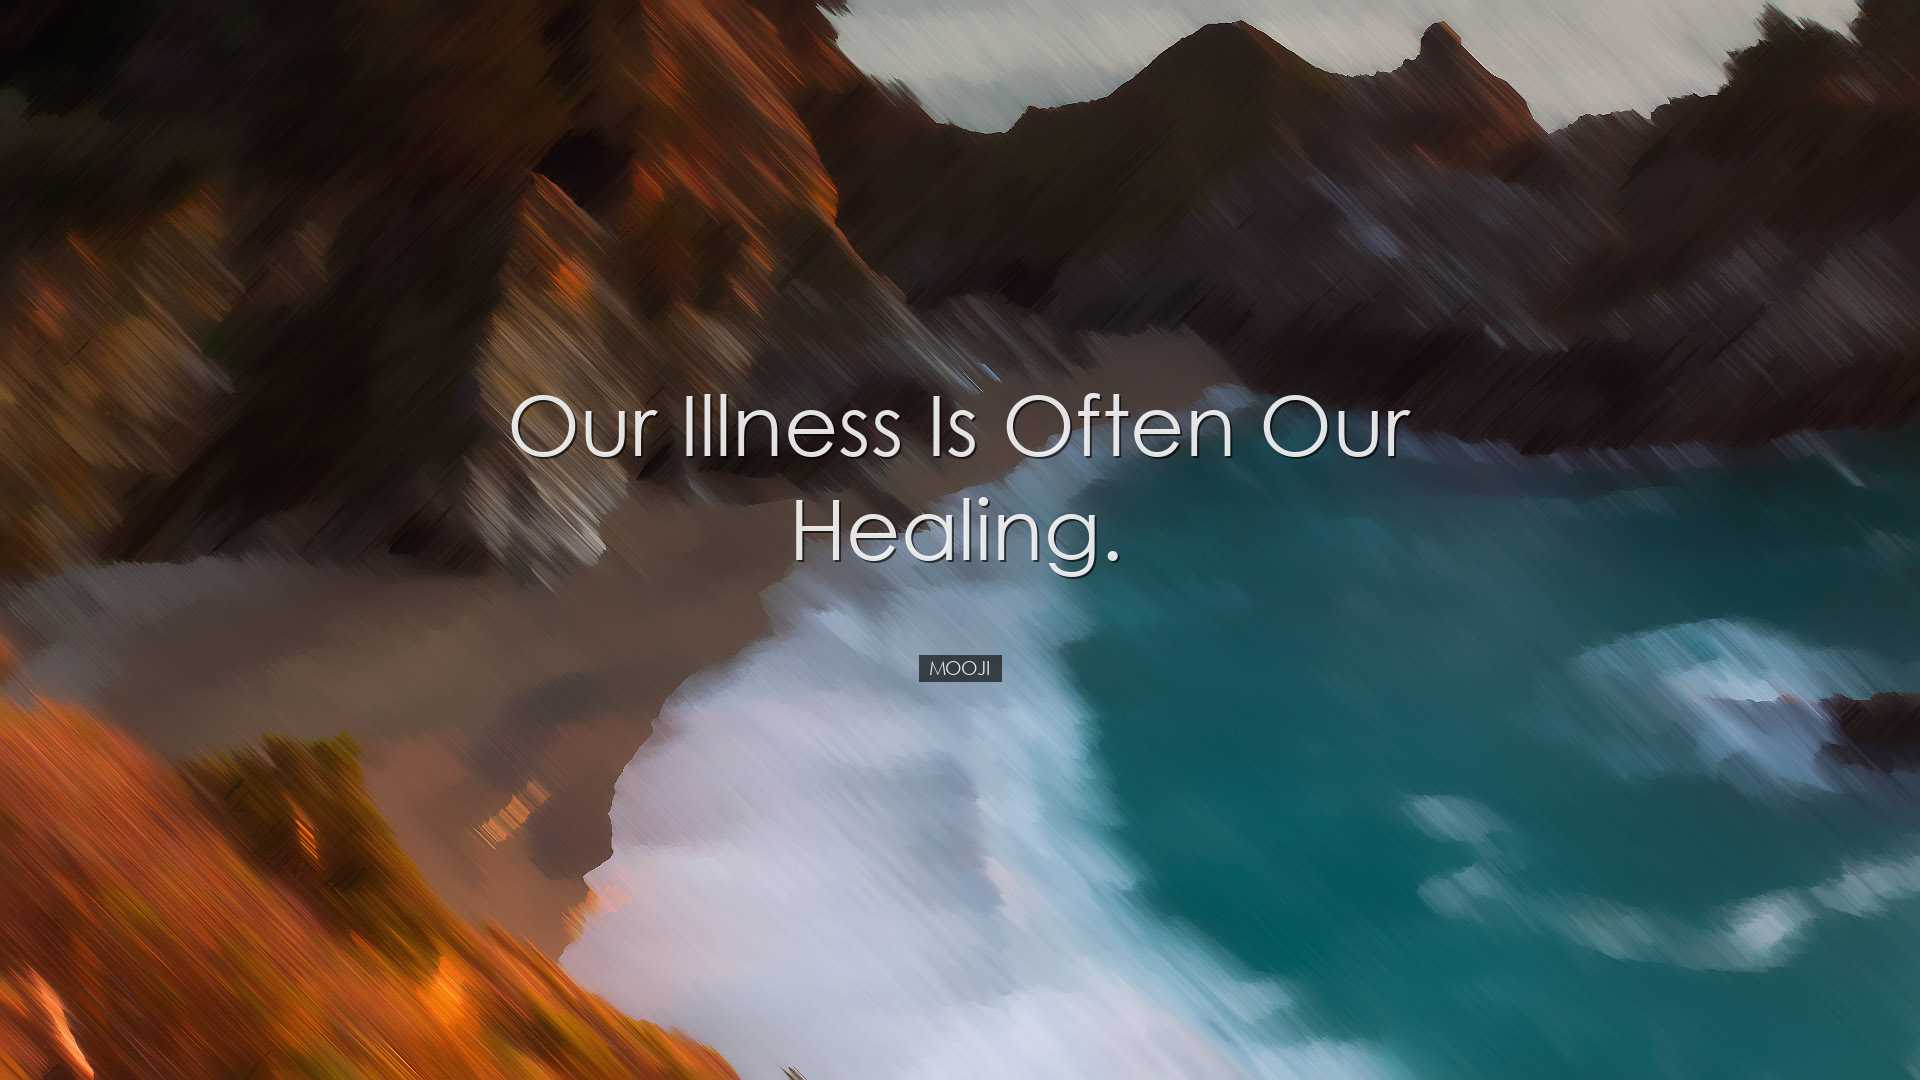 Our illness is often our healing. - Mooji